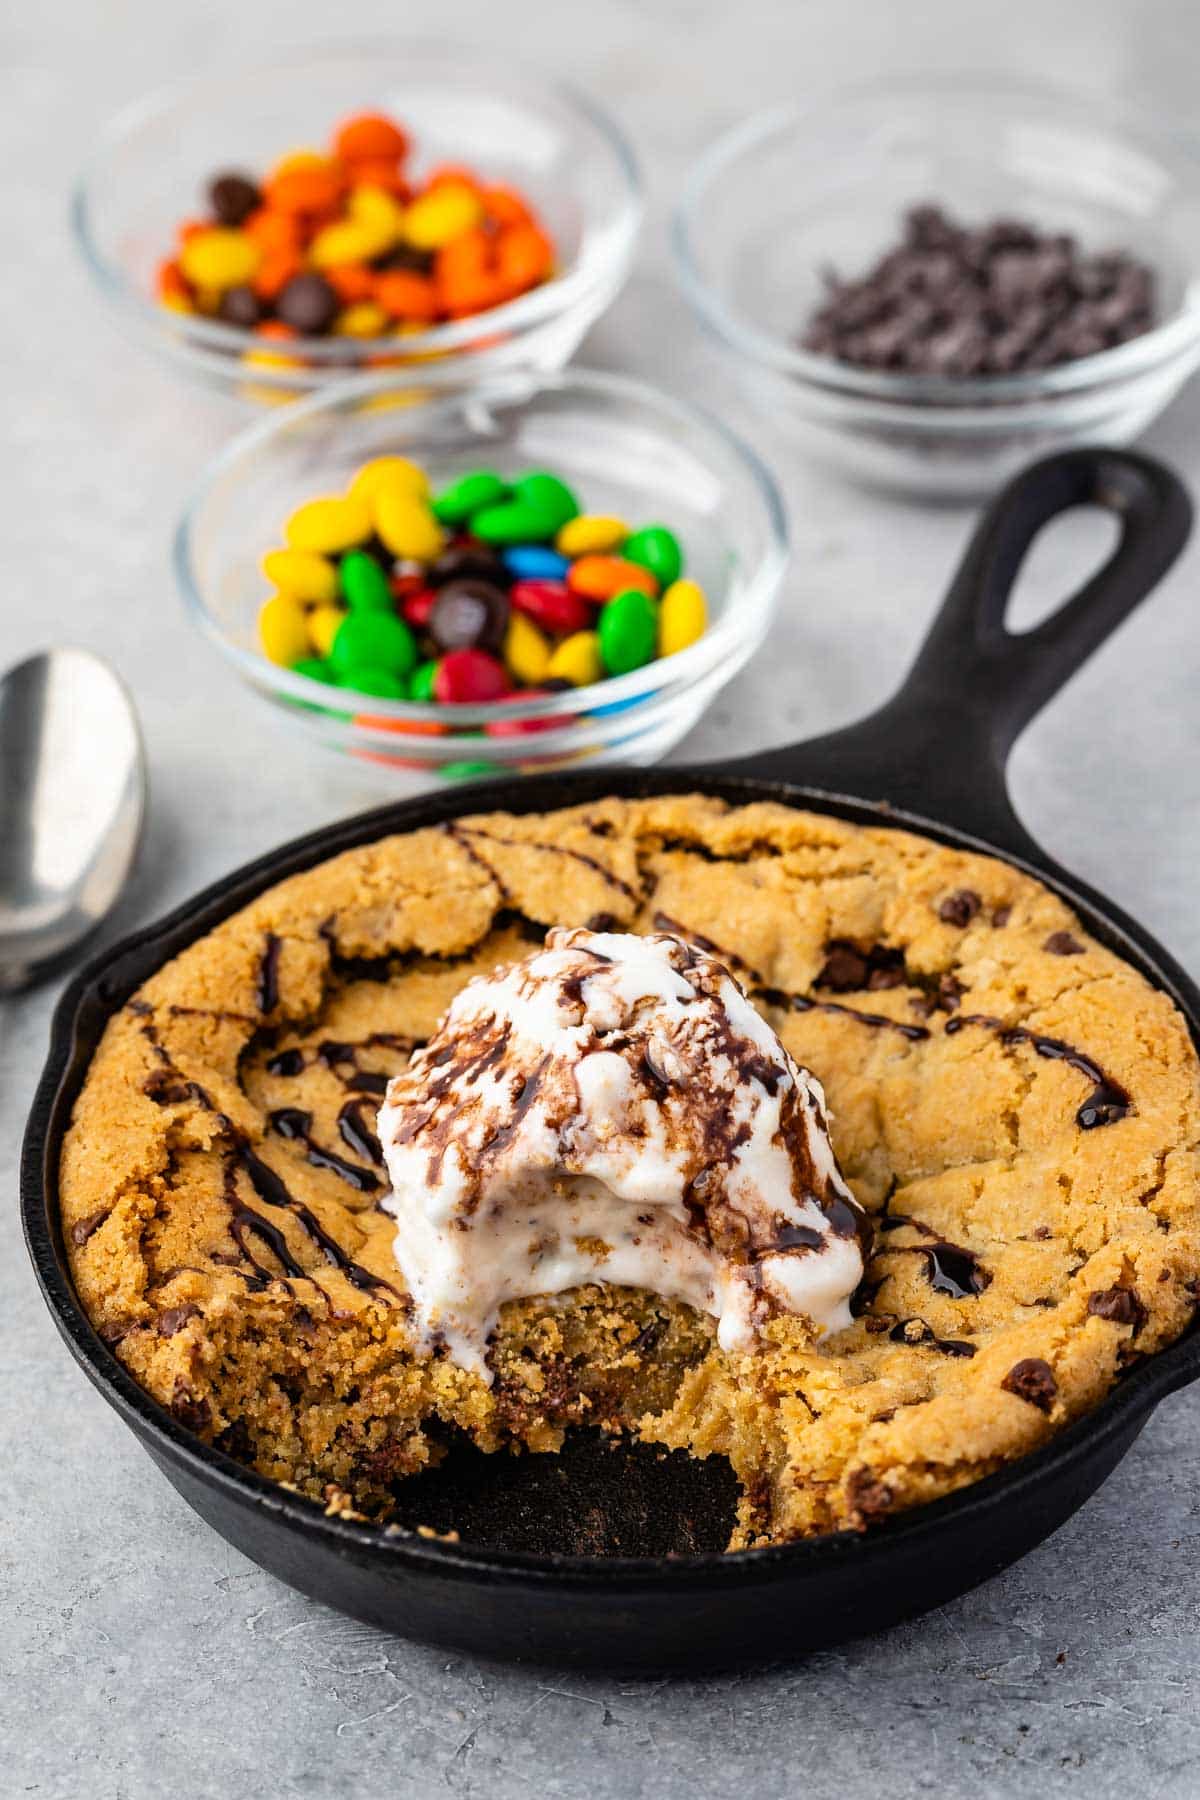 Mini Cast Iron Skillet Chocolate Chip Cookie Recipe (Half Baked Cookies) •  The Fresh Cooky